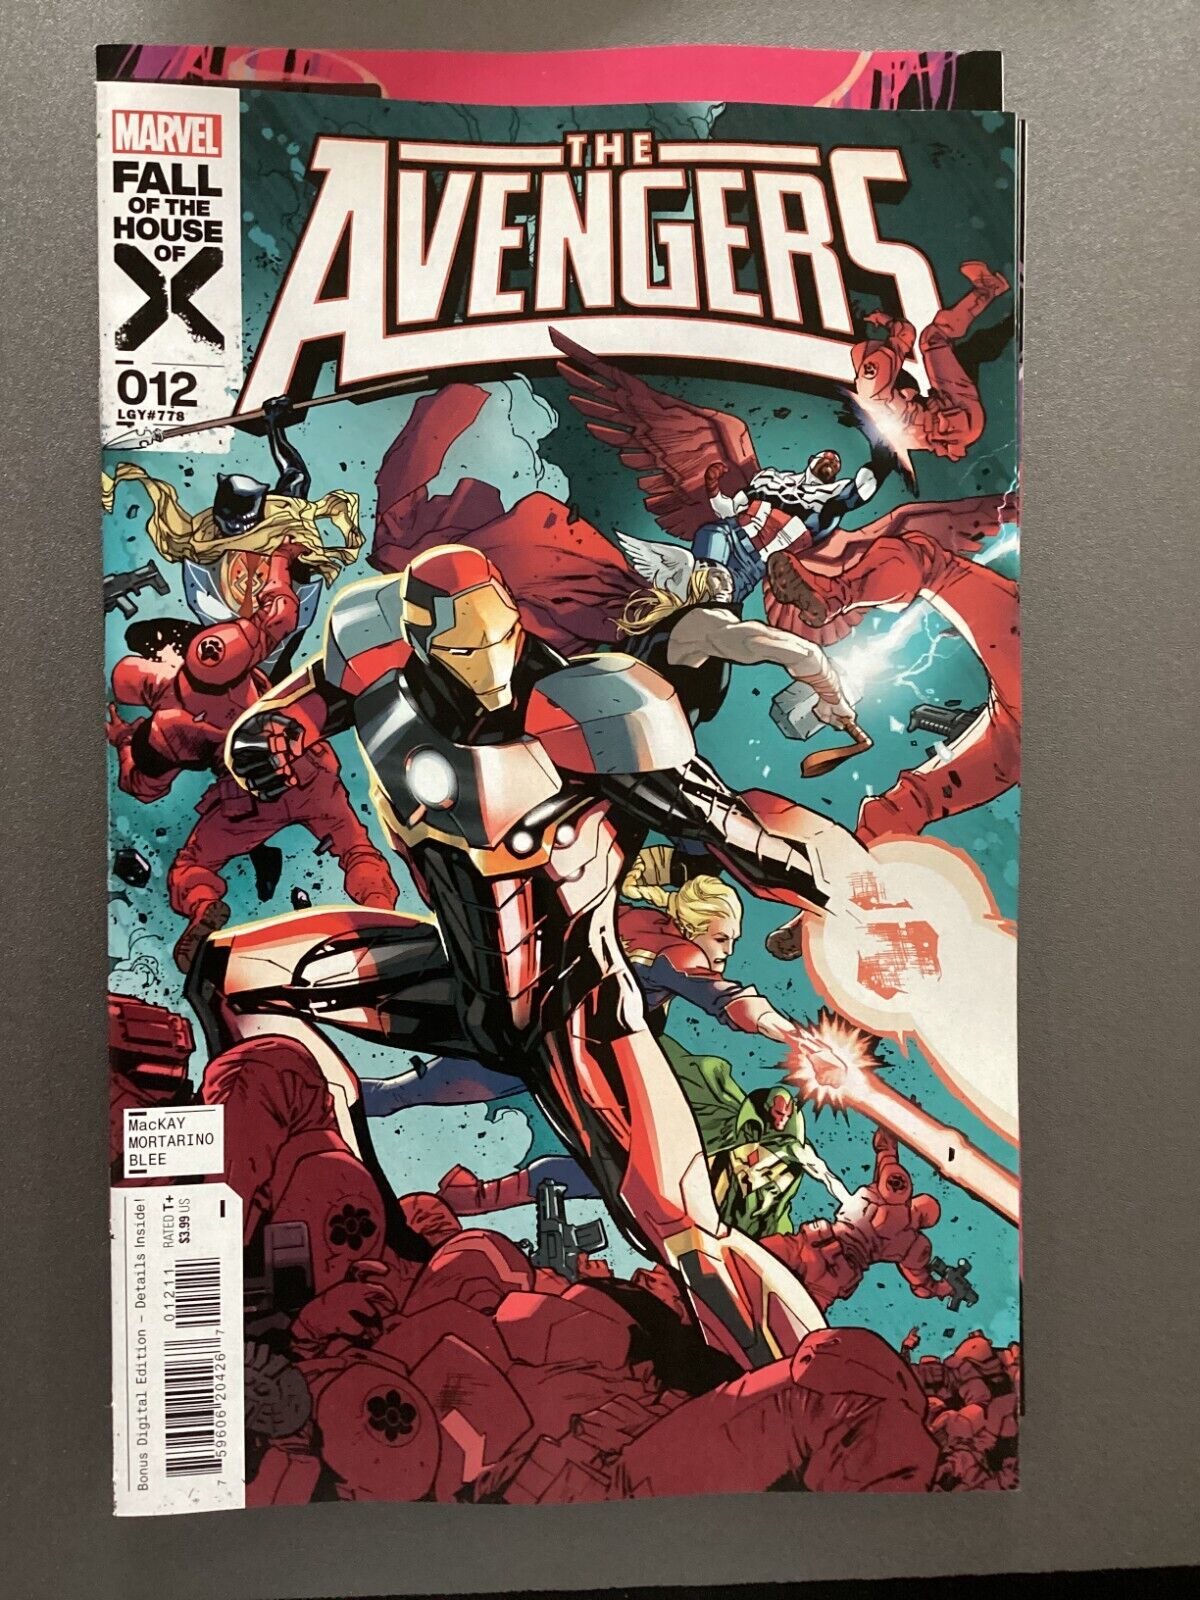 The Avengers #12 Cover A